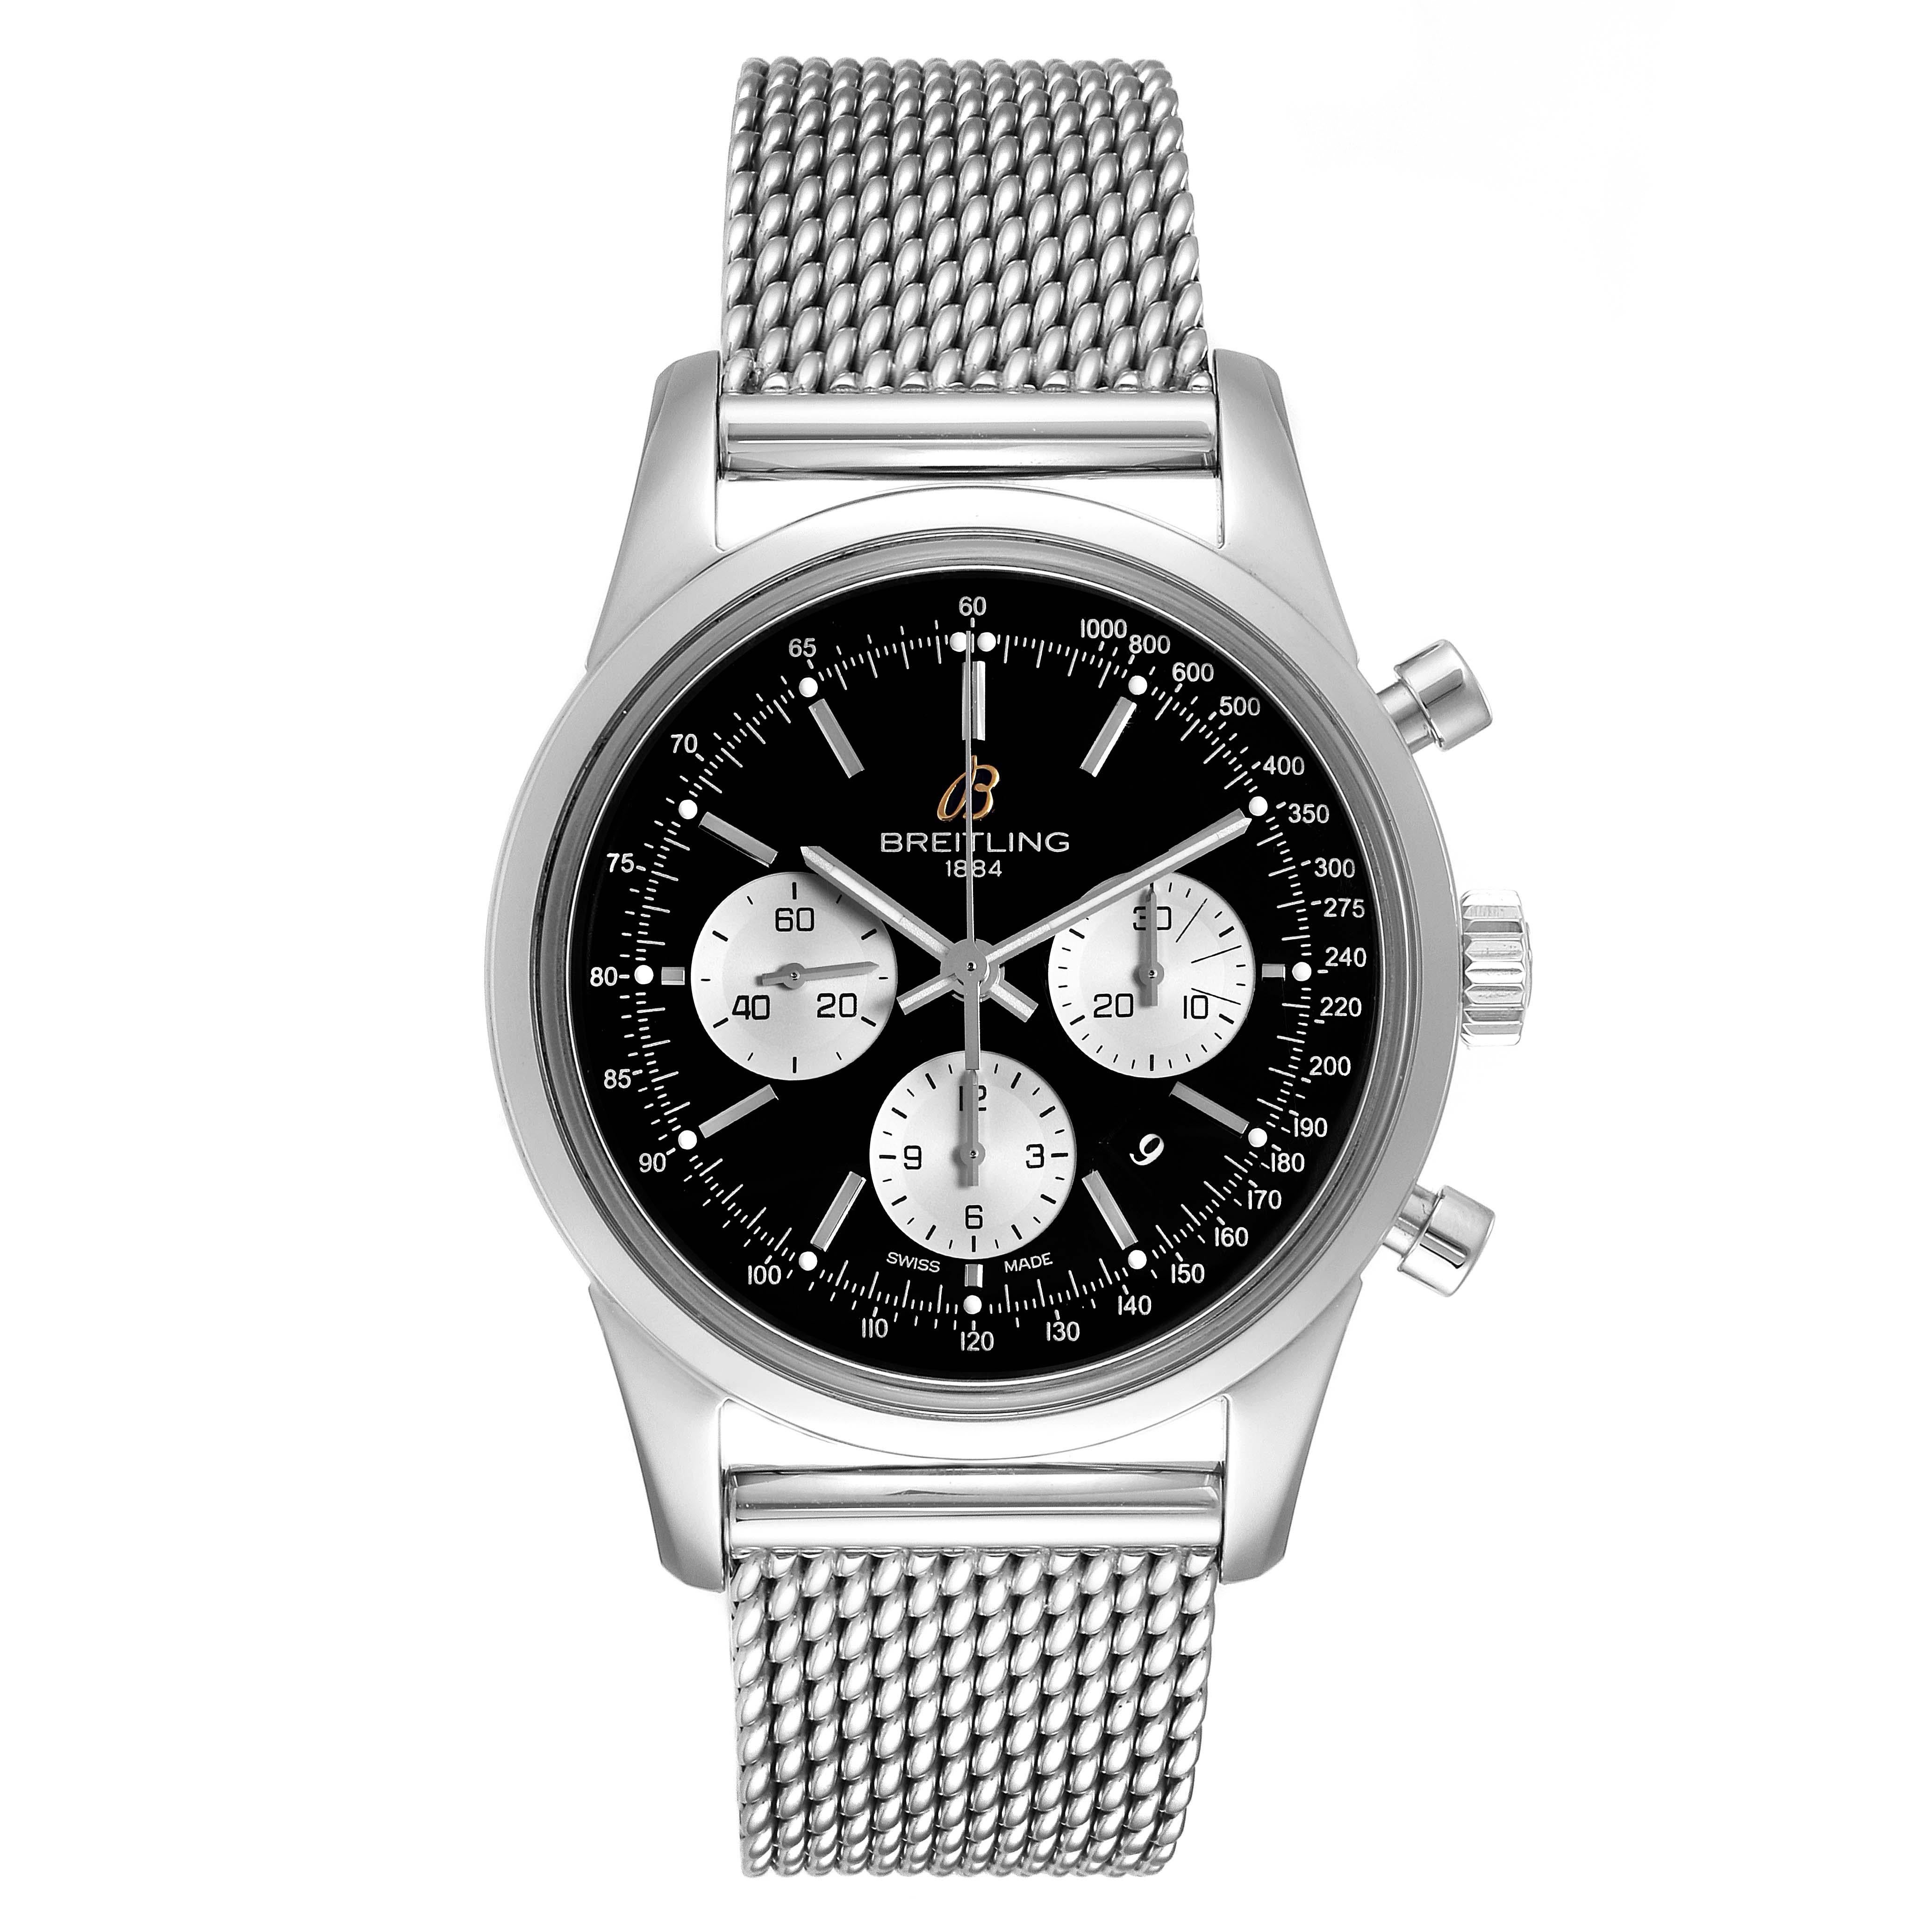 Breitling Transocean Chronograph LE Mens Watch AB0151 Box Papers. Authomatic self-winding chronograph movement. Stainless steel case 43.0 mm in diameter. Transparent case back. Stainless steel bezel. Scratch resistant sapphire crystal. Black dial